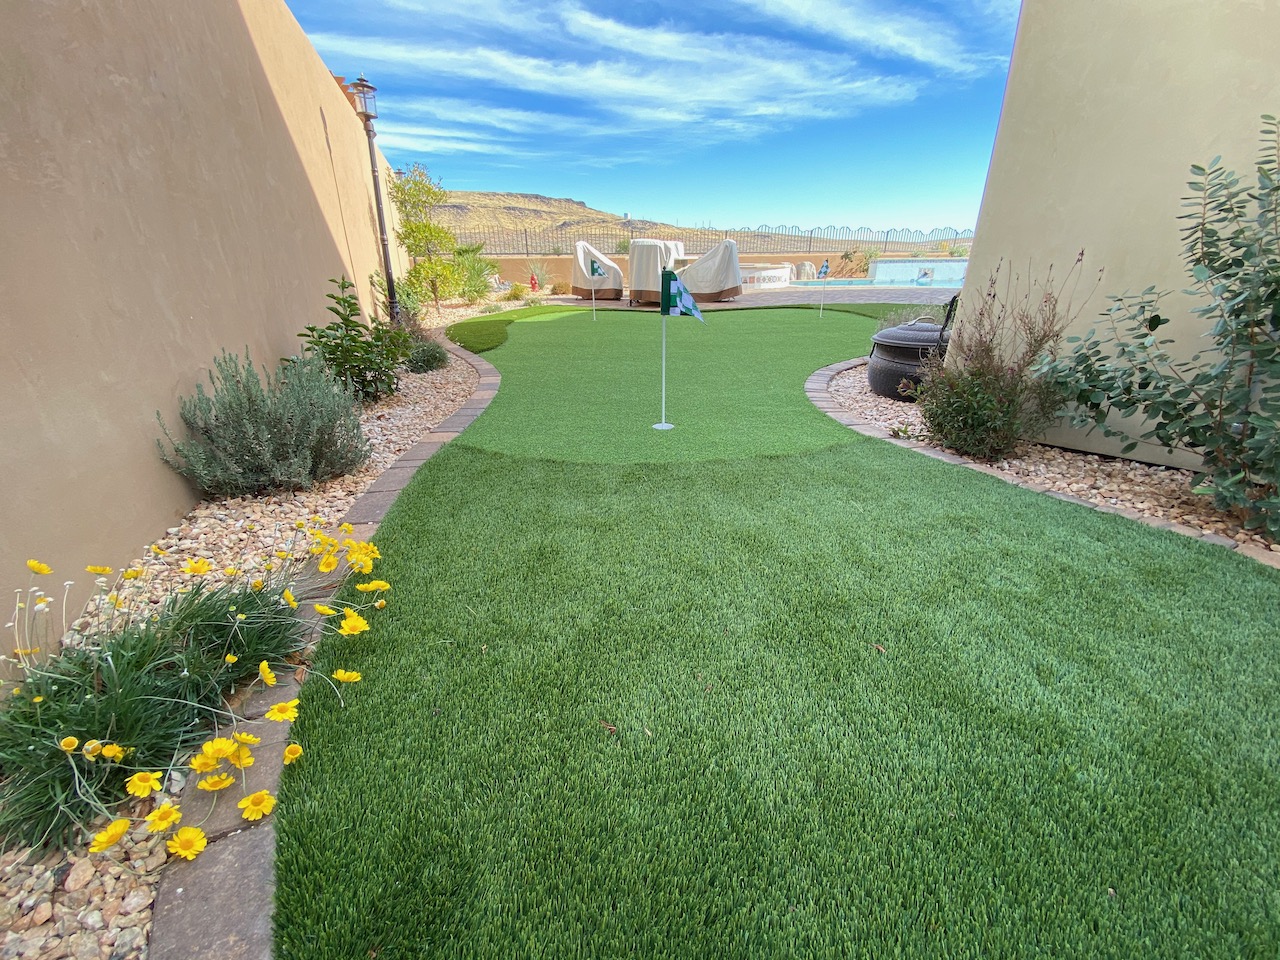 St. George Landscaper True Roots Landscaping and Design creates artificial turf landscapes, paver patios, and other hardscape designs throughout southern Utah.Artificial Turf Putting Green